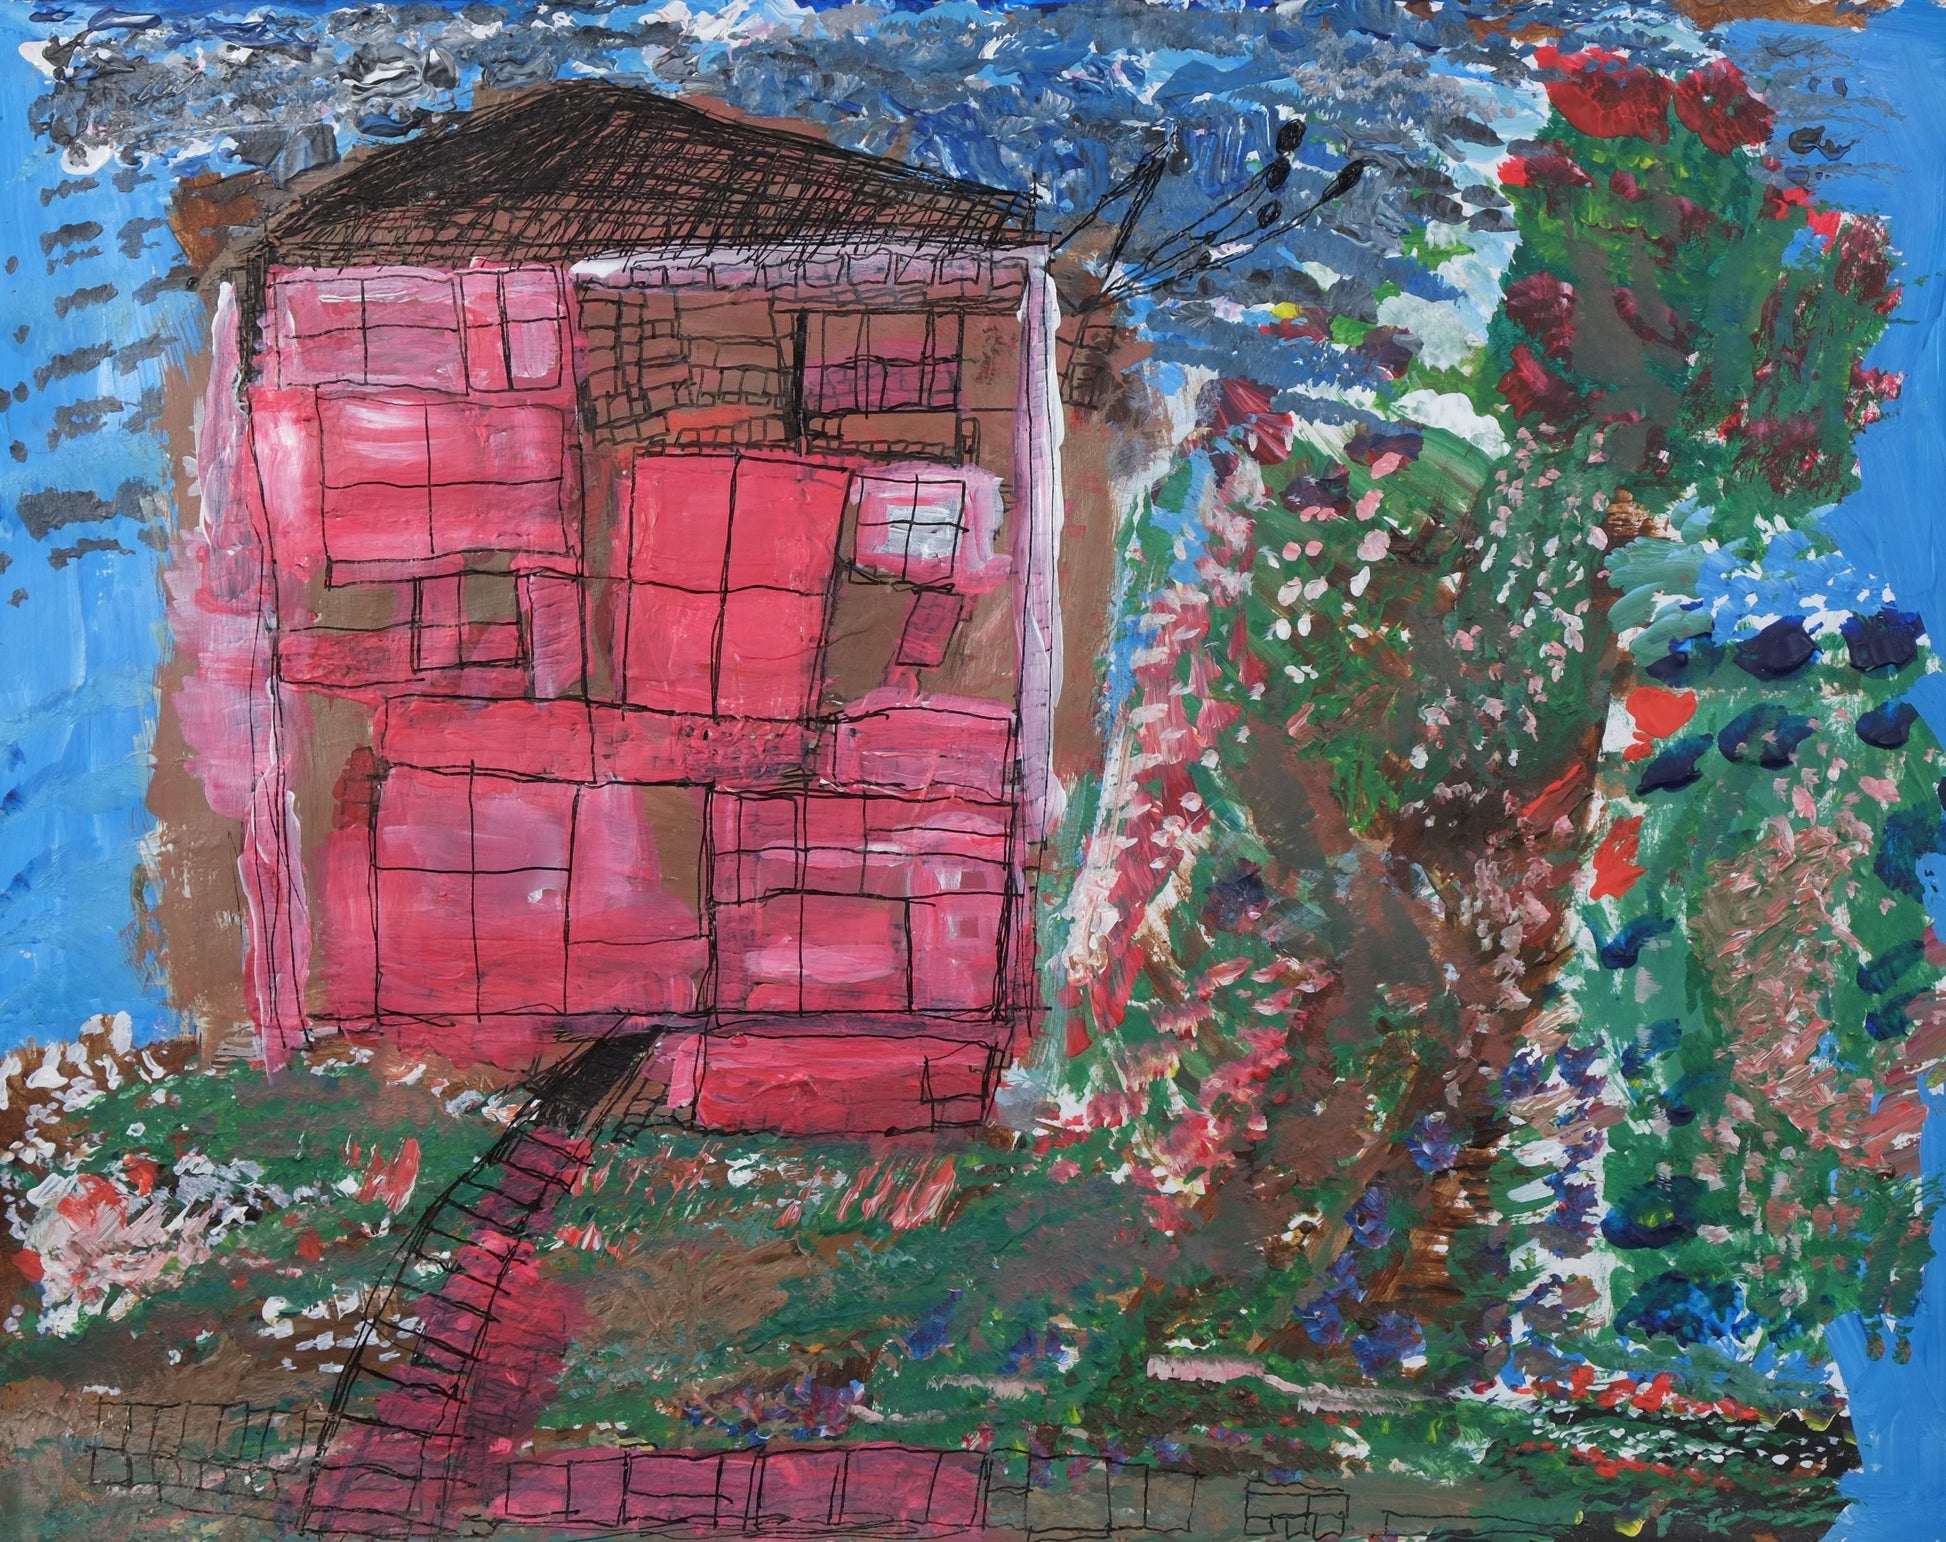 Acrylic and ink on paper artwork of a red and brown house with a black roof against a blue sky with a green garden